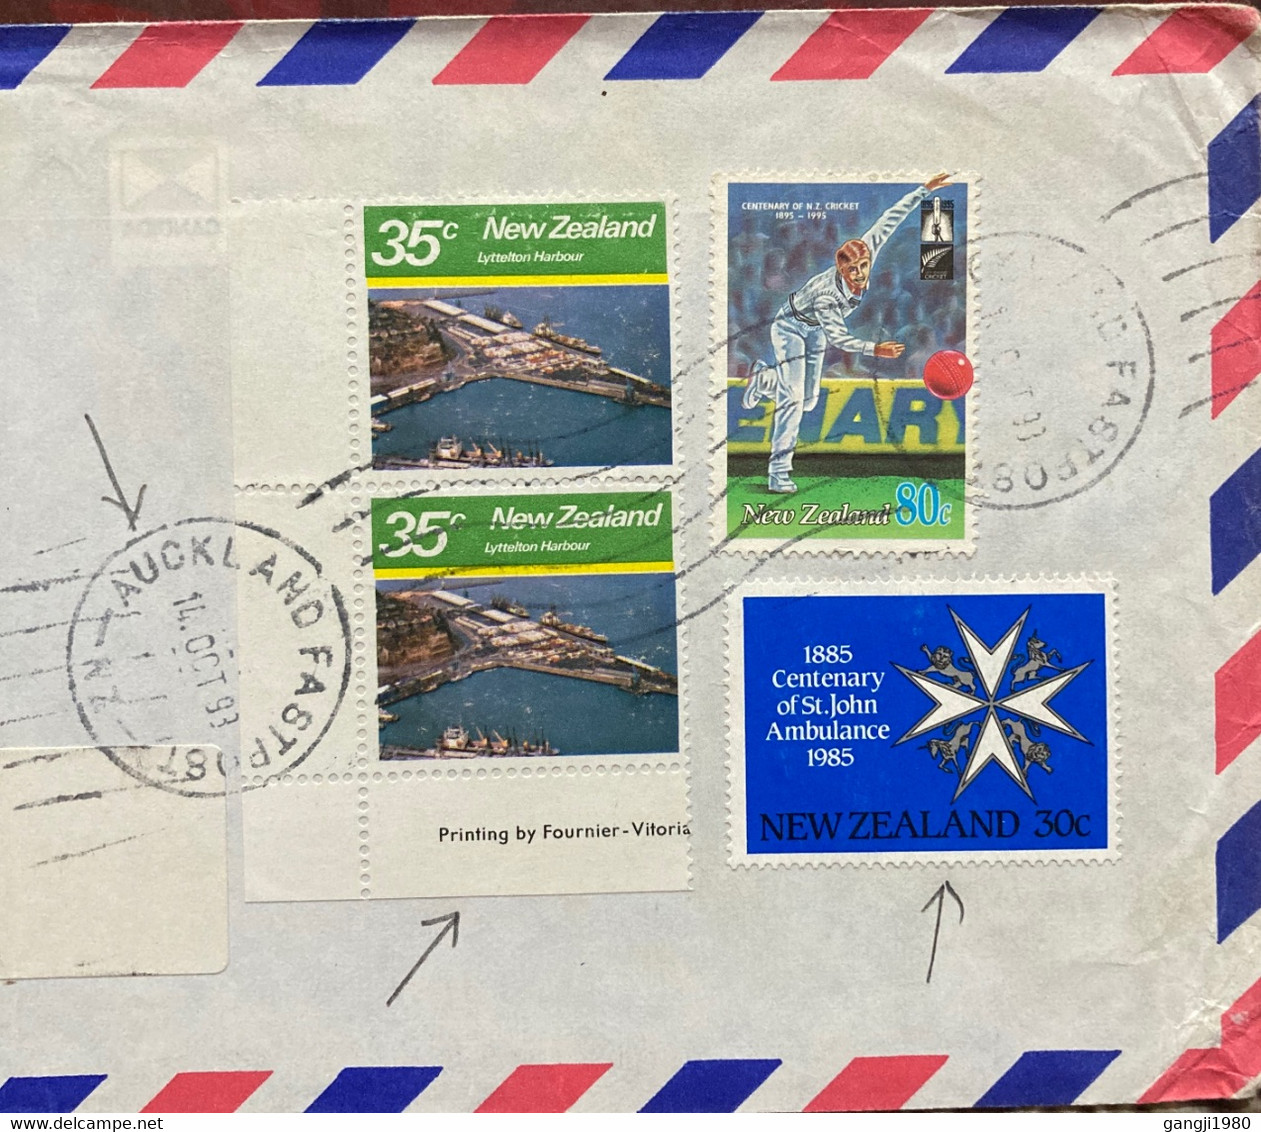 NEW ZEALAND 1985, CRICKET & AMBULANCE, HEALTH, MEDICAL, SPORT, LYTTELTON HARBOUR, AUCKLAND FAST POST CANCEL, COVER TO IN - Lettres & Documents